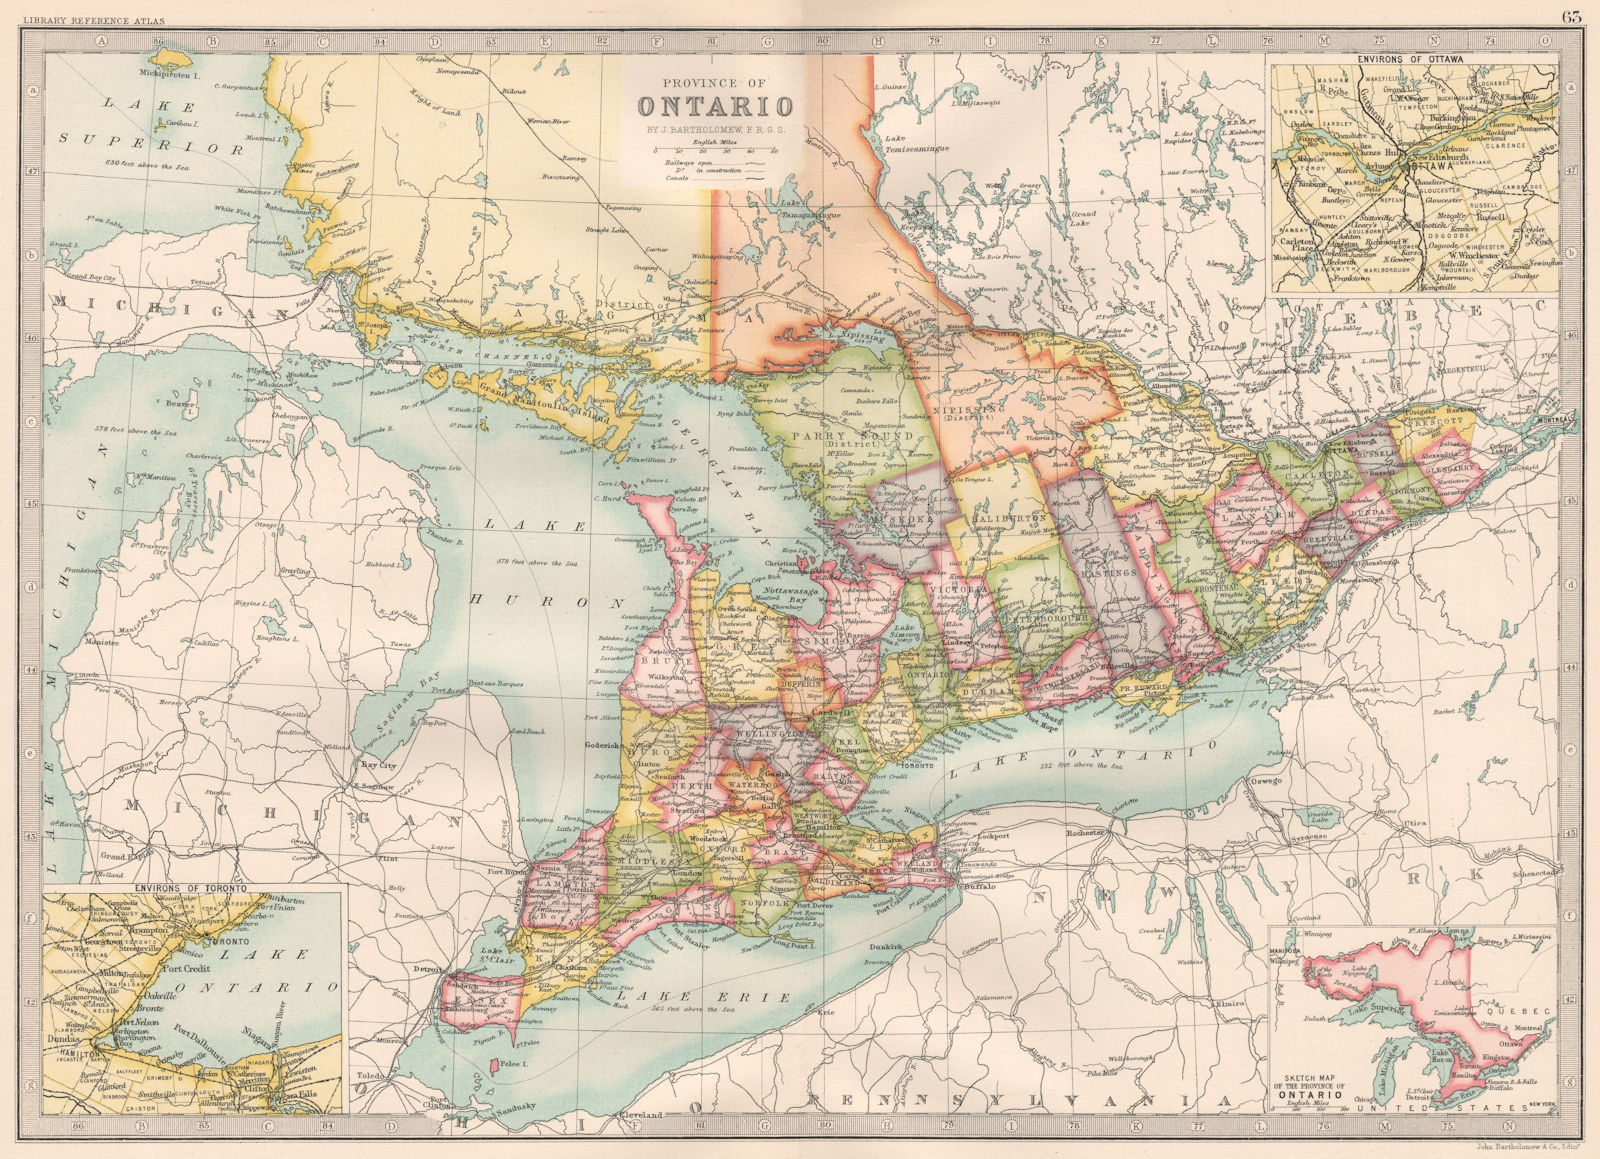 Associate Product ONTARIO. showing counties. BARTHOLOMEW 1890 old antique vintage map plan chart